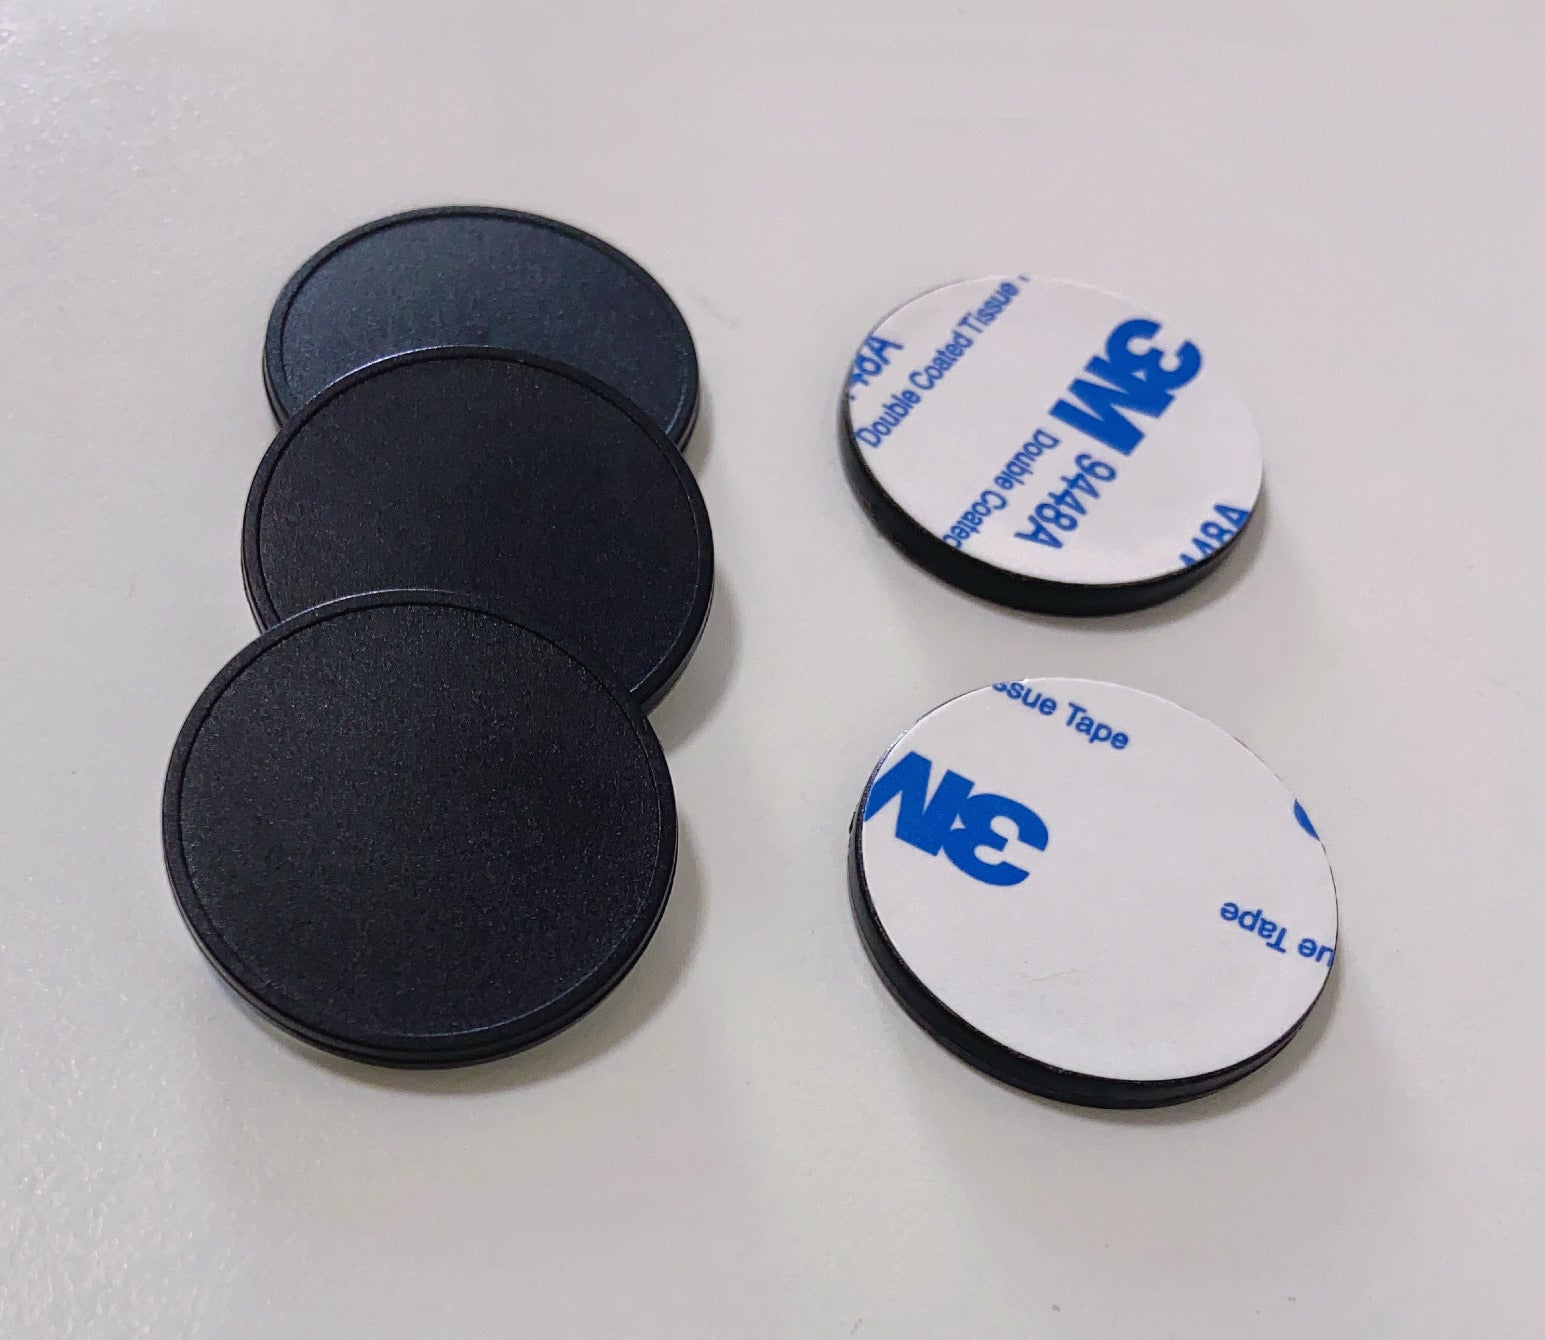 NFC Guard Tour ON-METAL rugged sticky token - Black ABS - NTAG213 - 30mm round